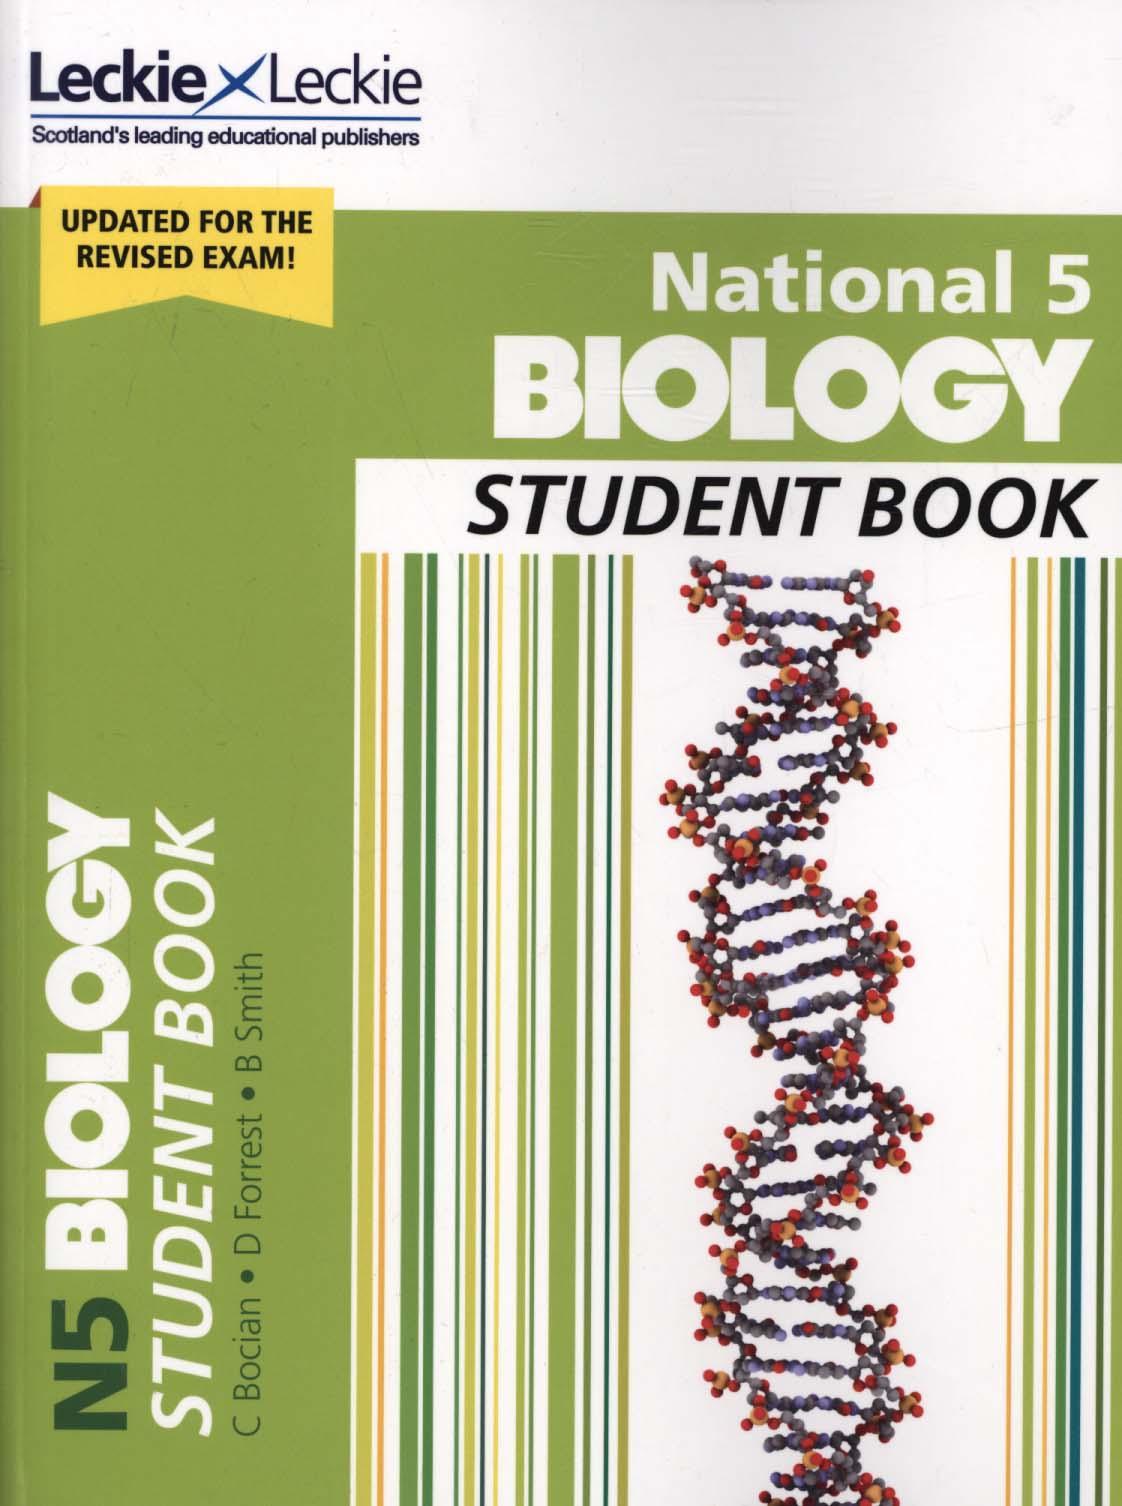 National 5 Biology Student Book for New 2019 Exams -  